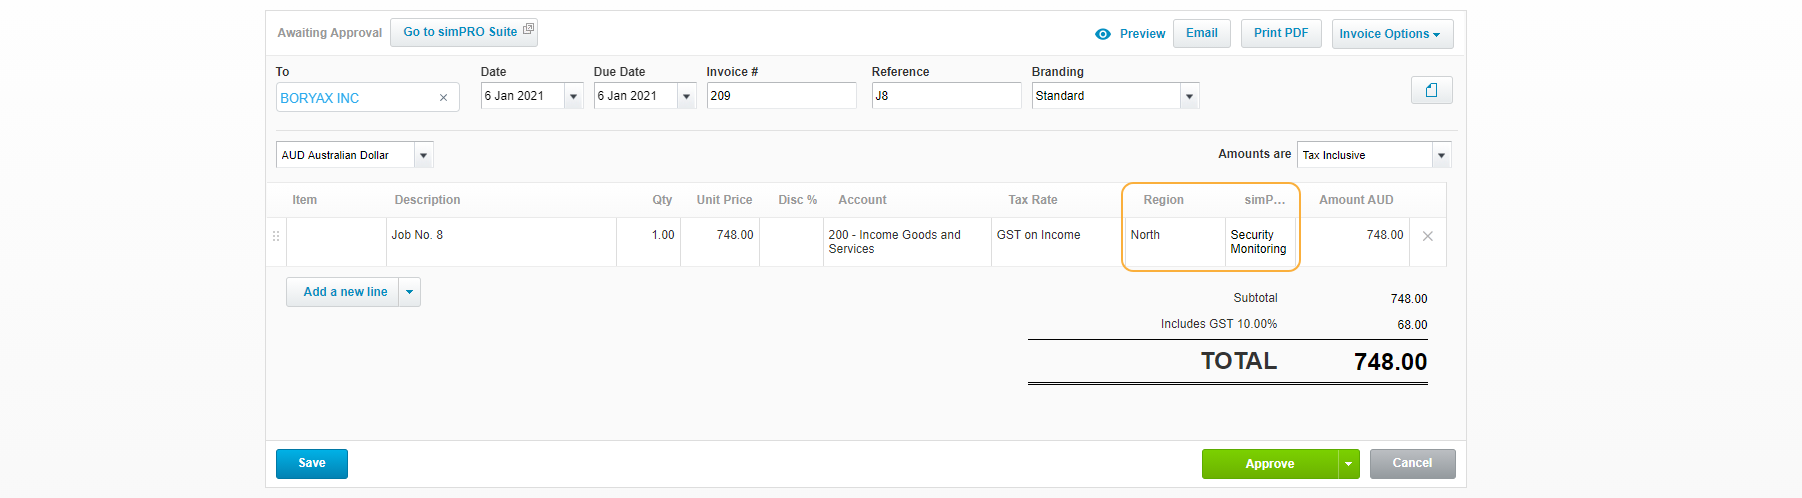 A screenshot of a tracking category applied to a line item in an invoice in Xero.